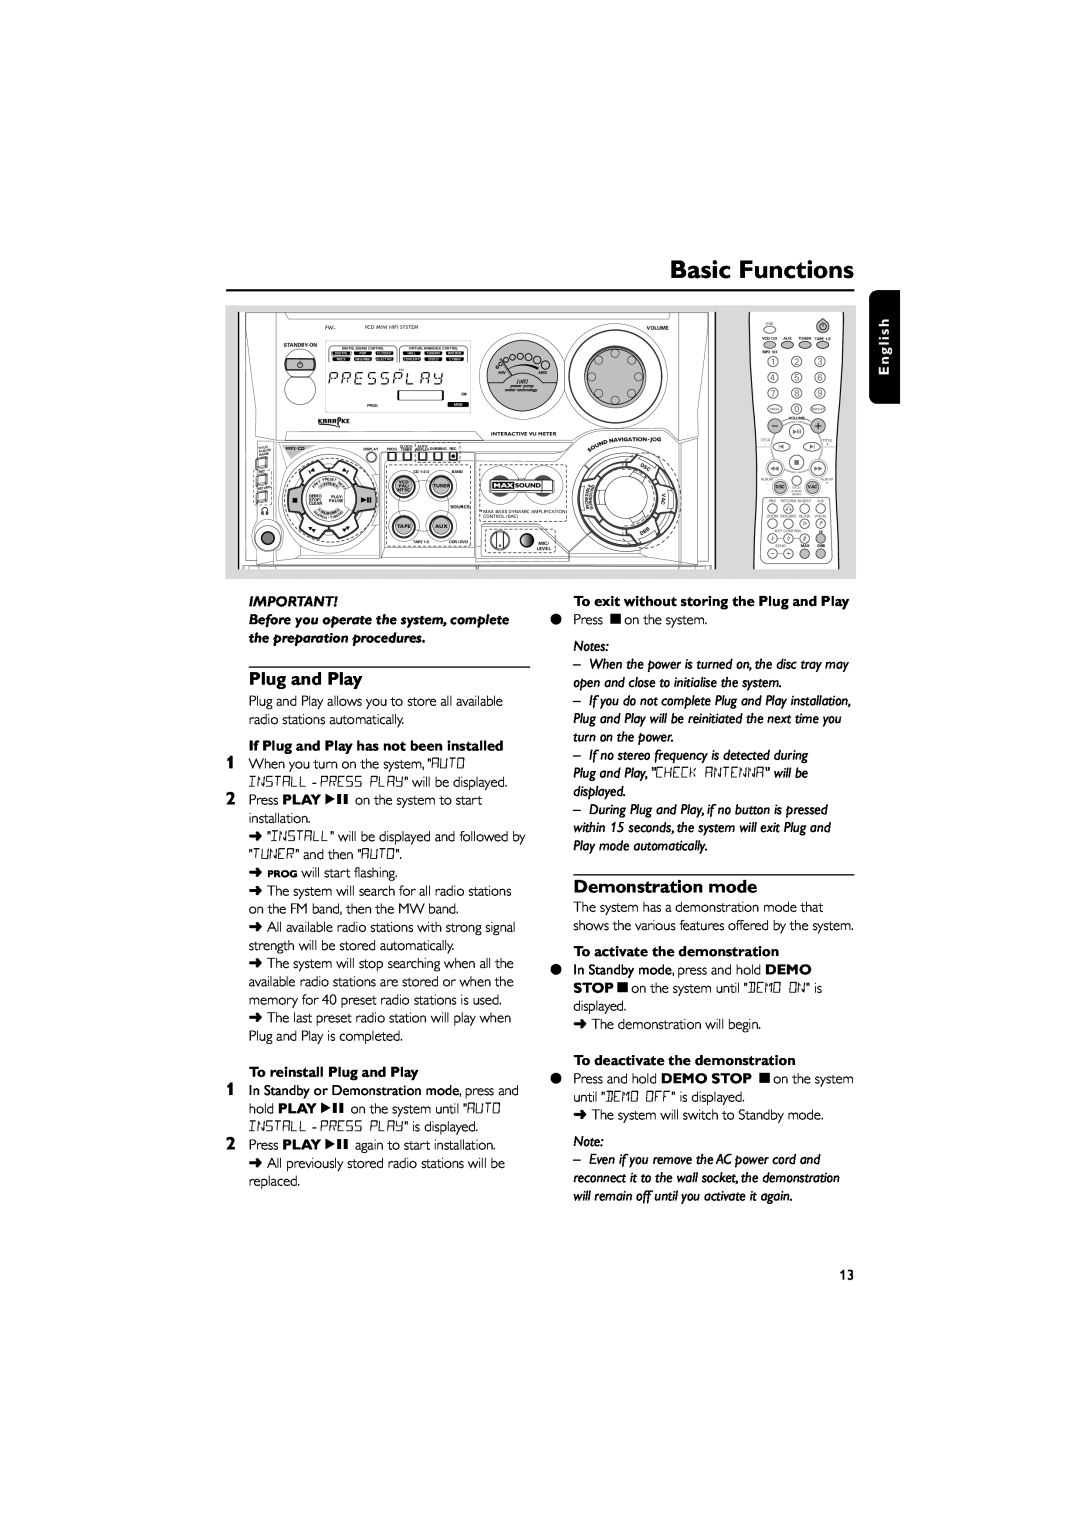 Philips FWV595 manual Basic Functions, E n g l i s h, If Plug and Play has not been installed, To reinstall Plug and Play 